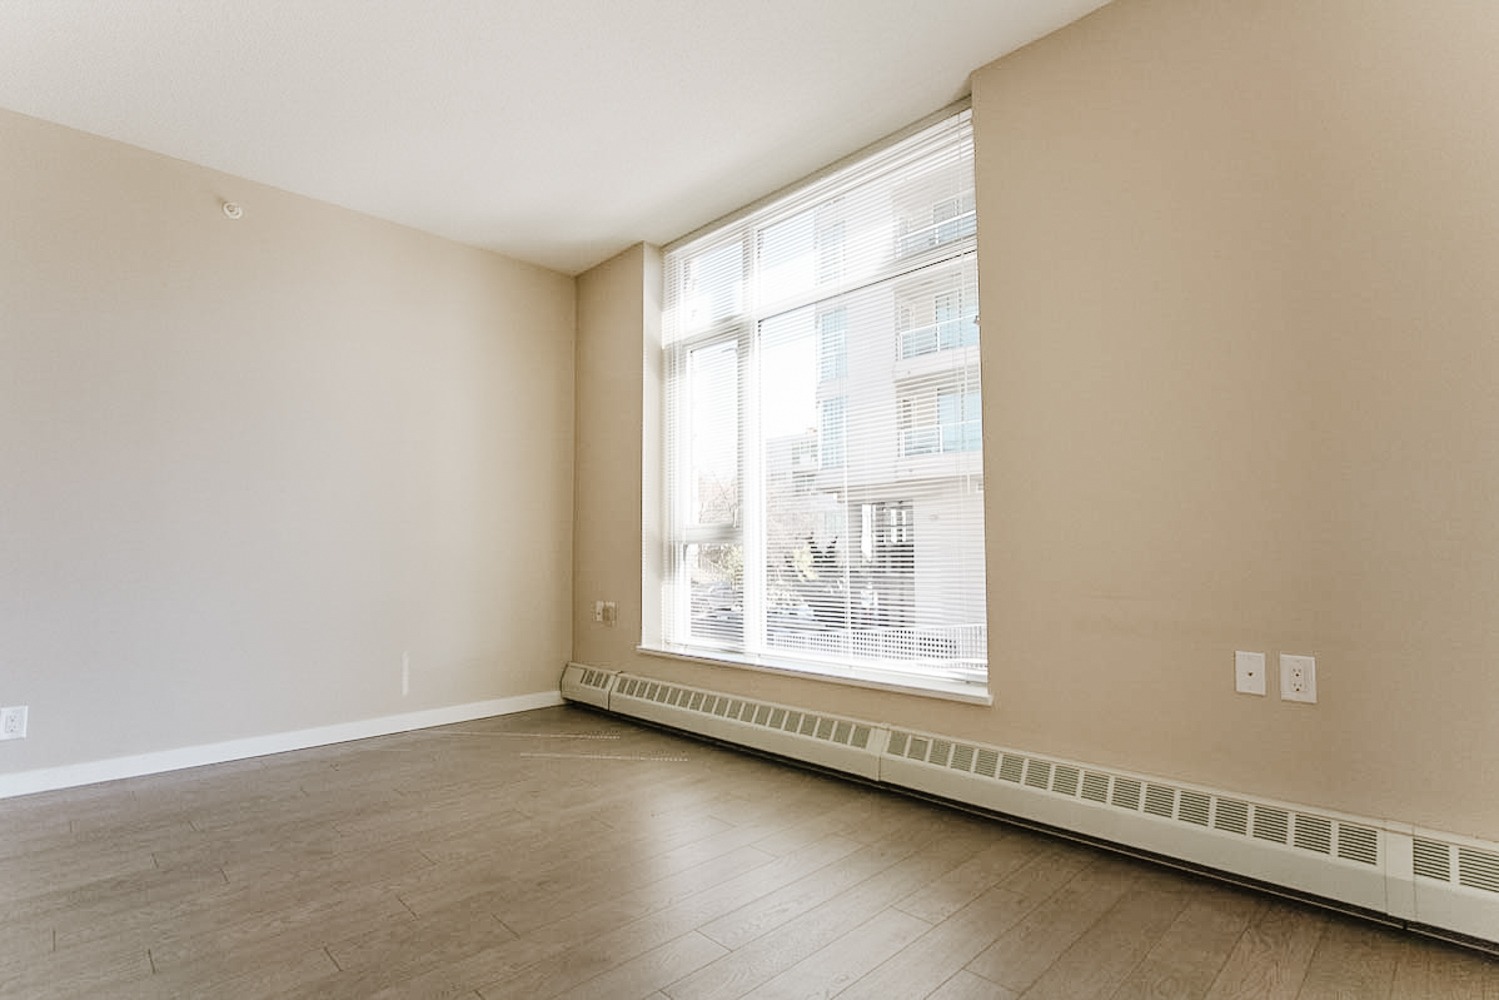 one-bedroom-condo-for-rent-in-lower-lonsdale-north-vancouver-3